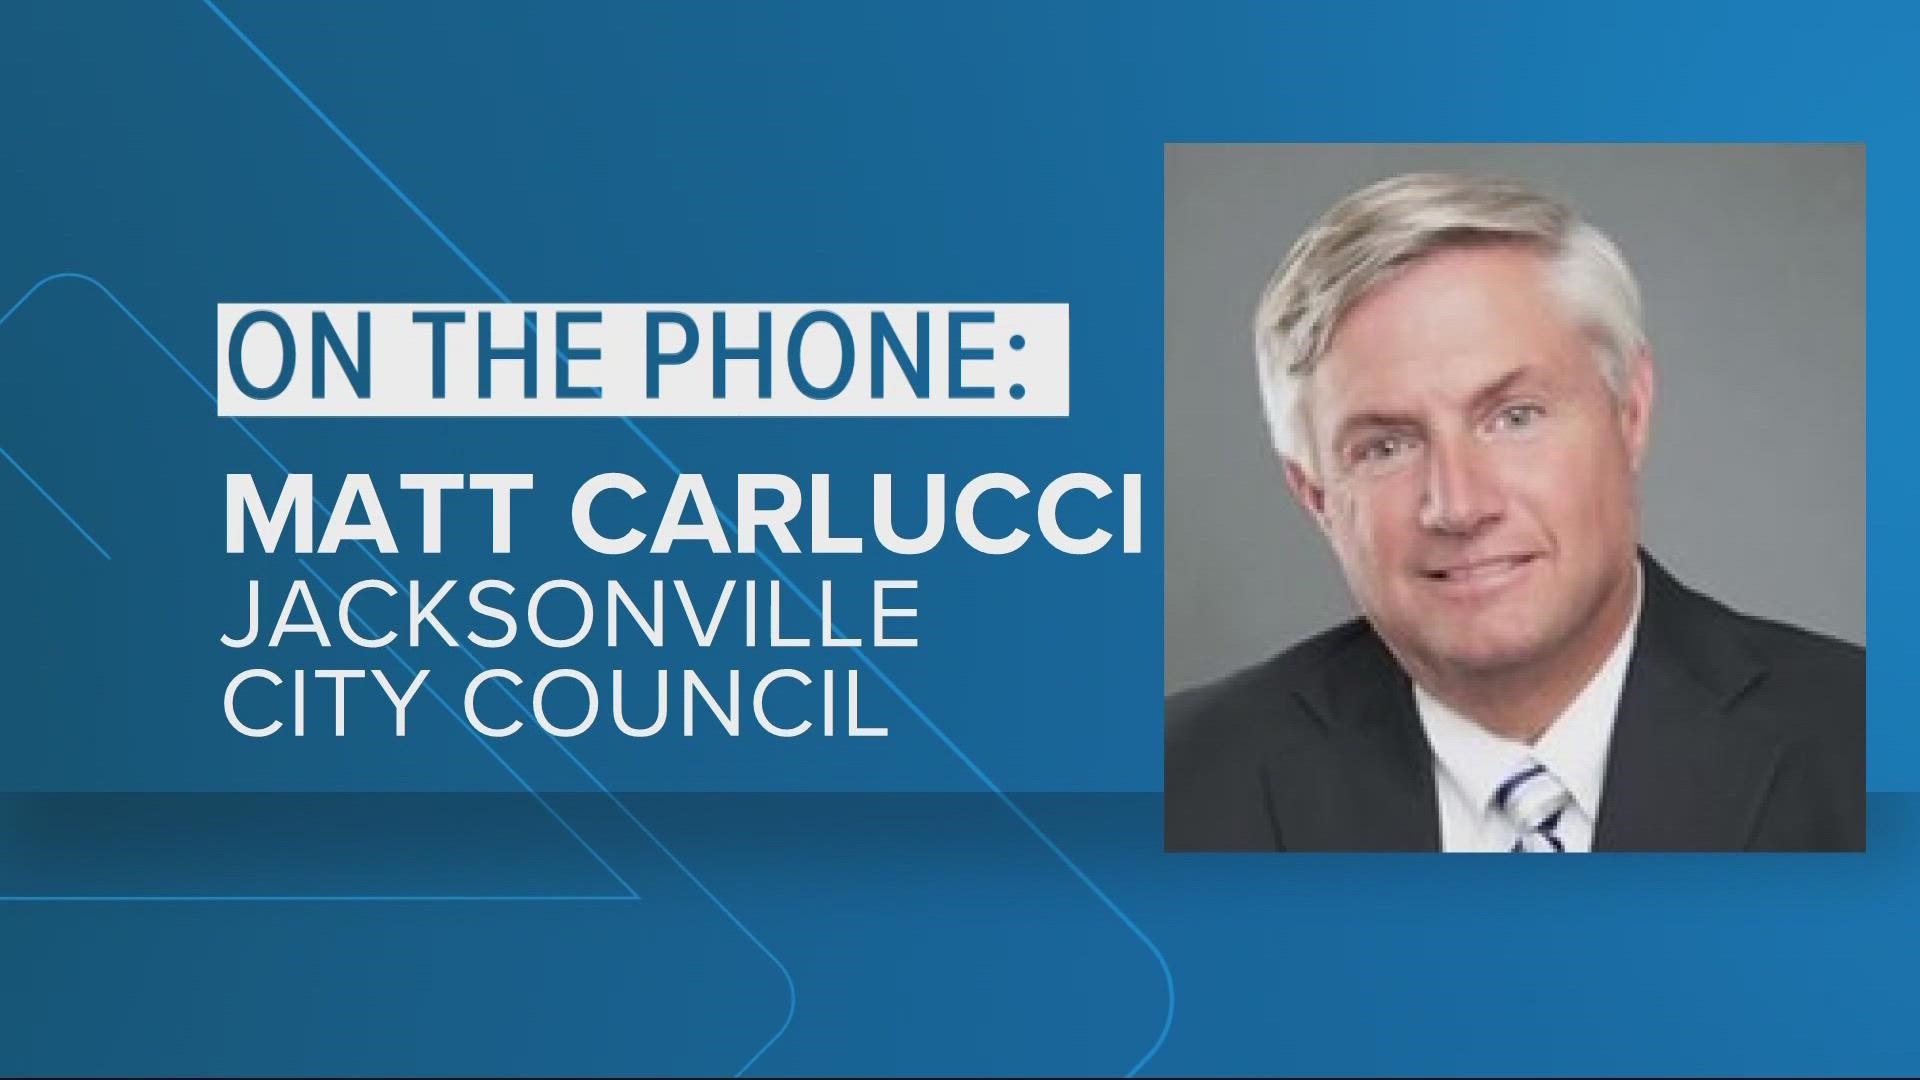 Longtime City Councilman Matt Carlucci will serve another term on the council starting in March.